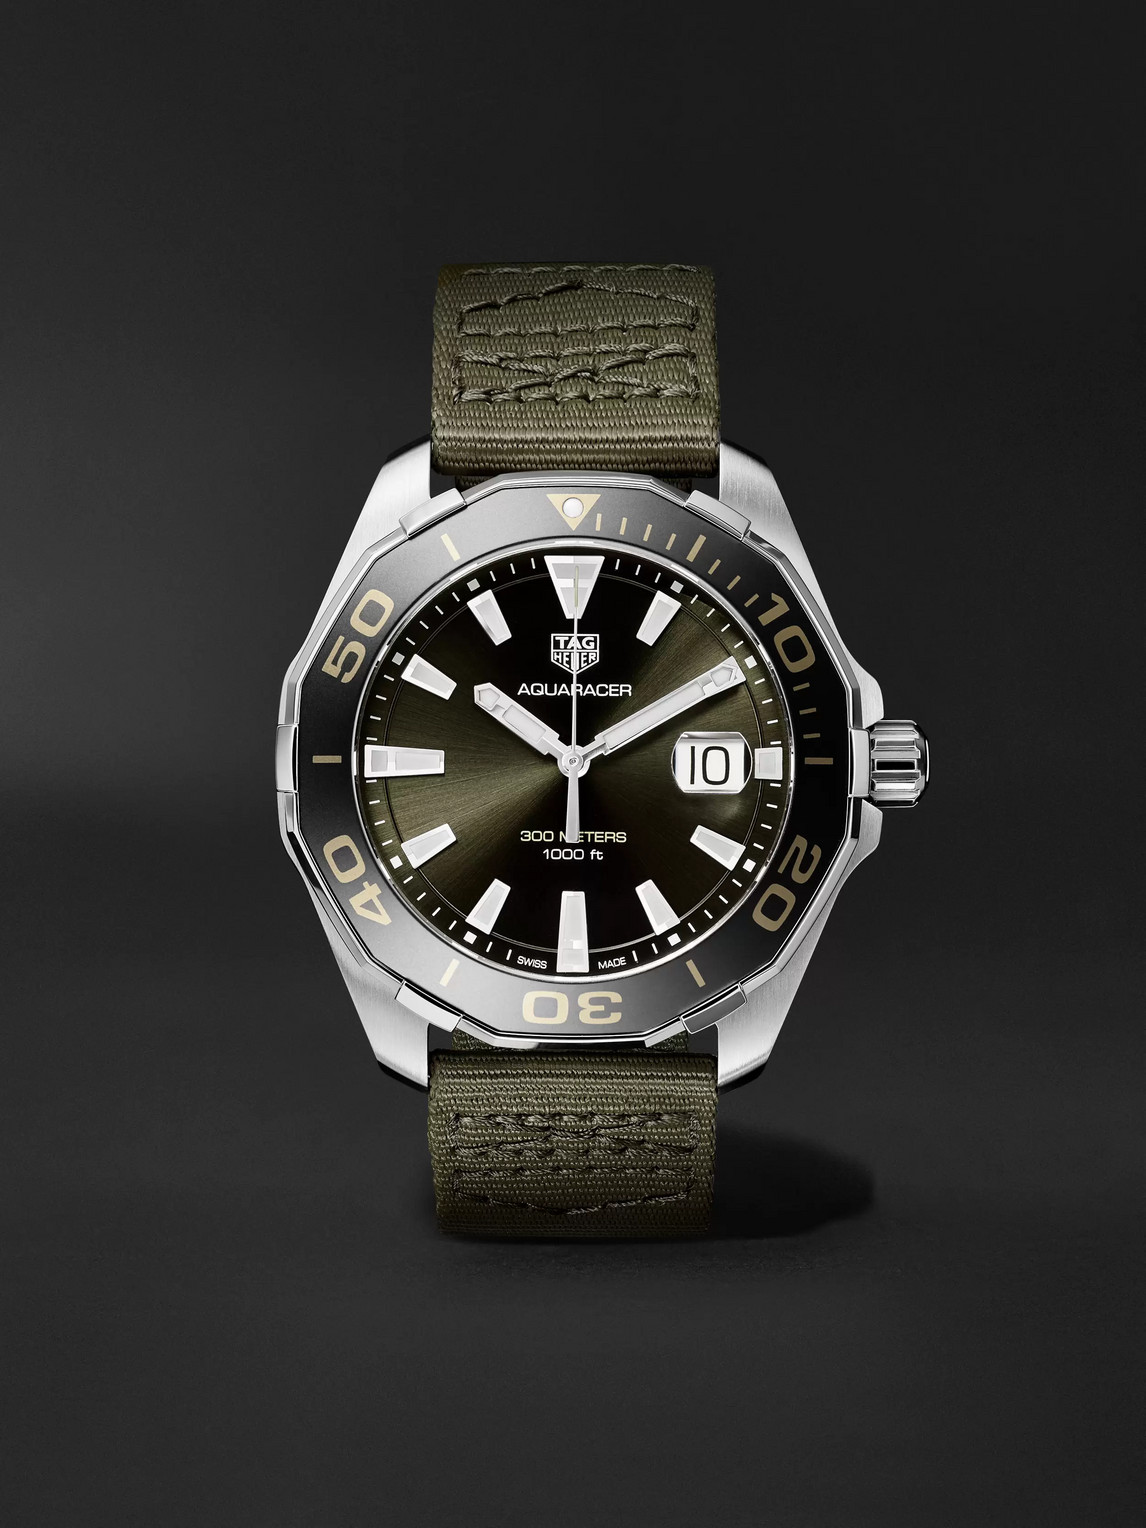 Tag Heuer Aquaracer Limited Edition Quartz 43mm Steel And Webbing Watch, Ref. No. Way101e.fc8222 In Green